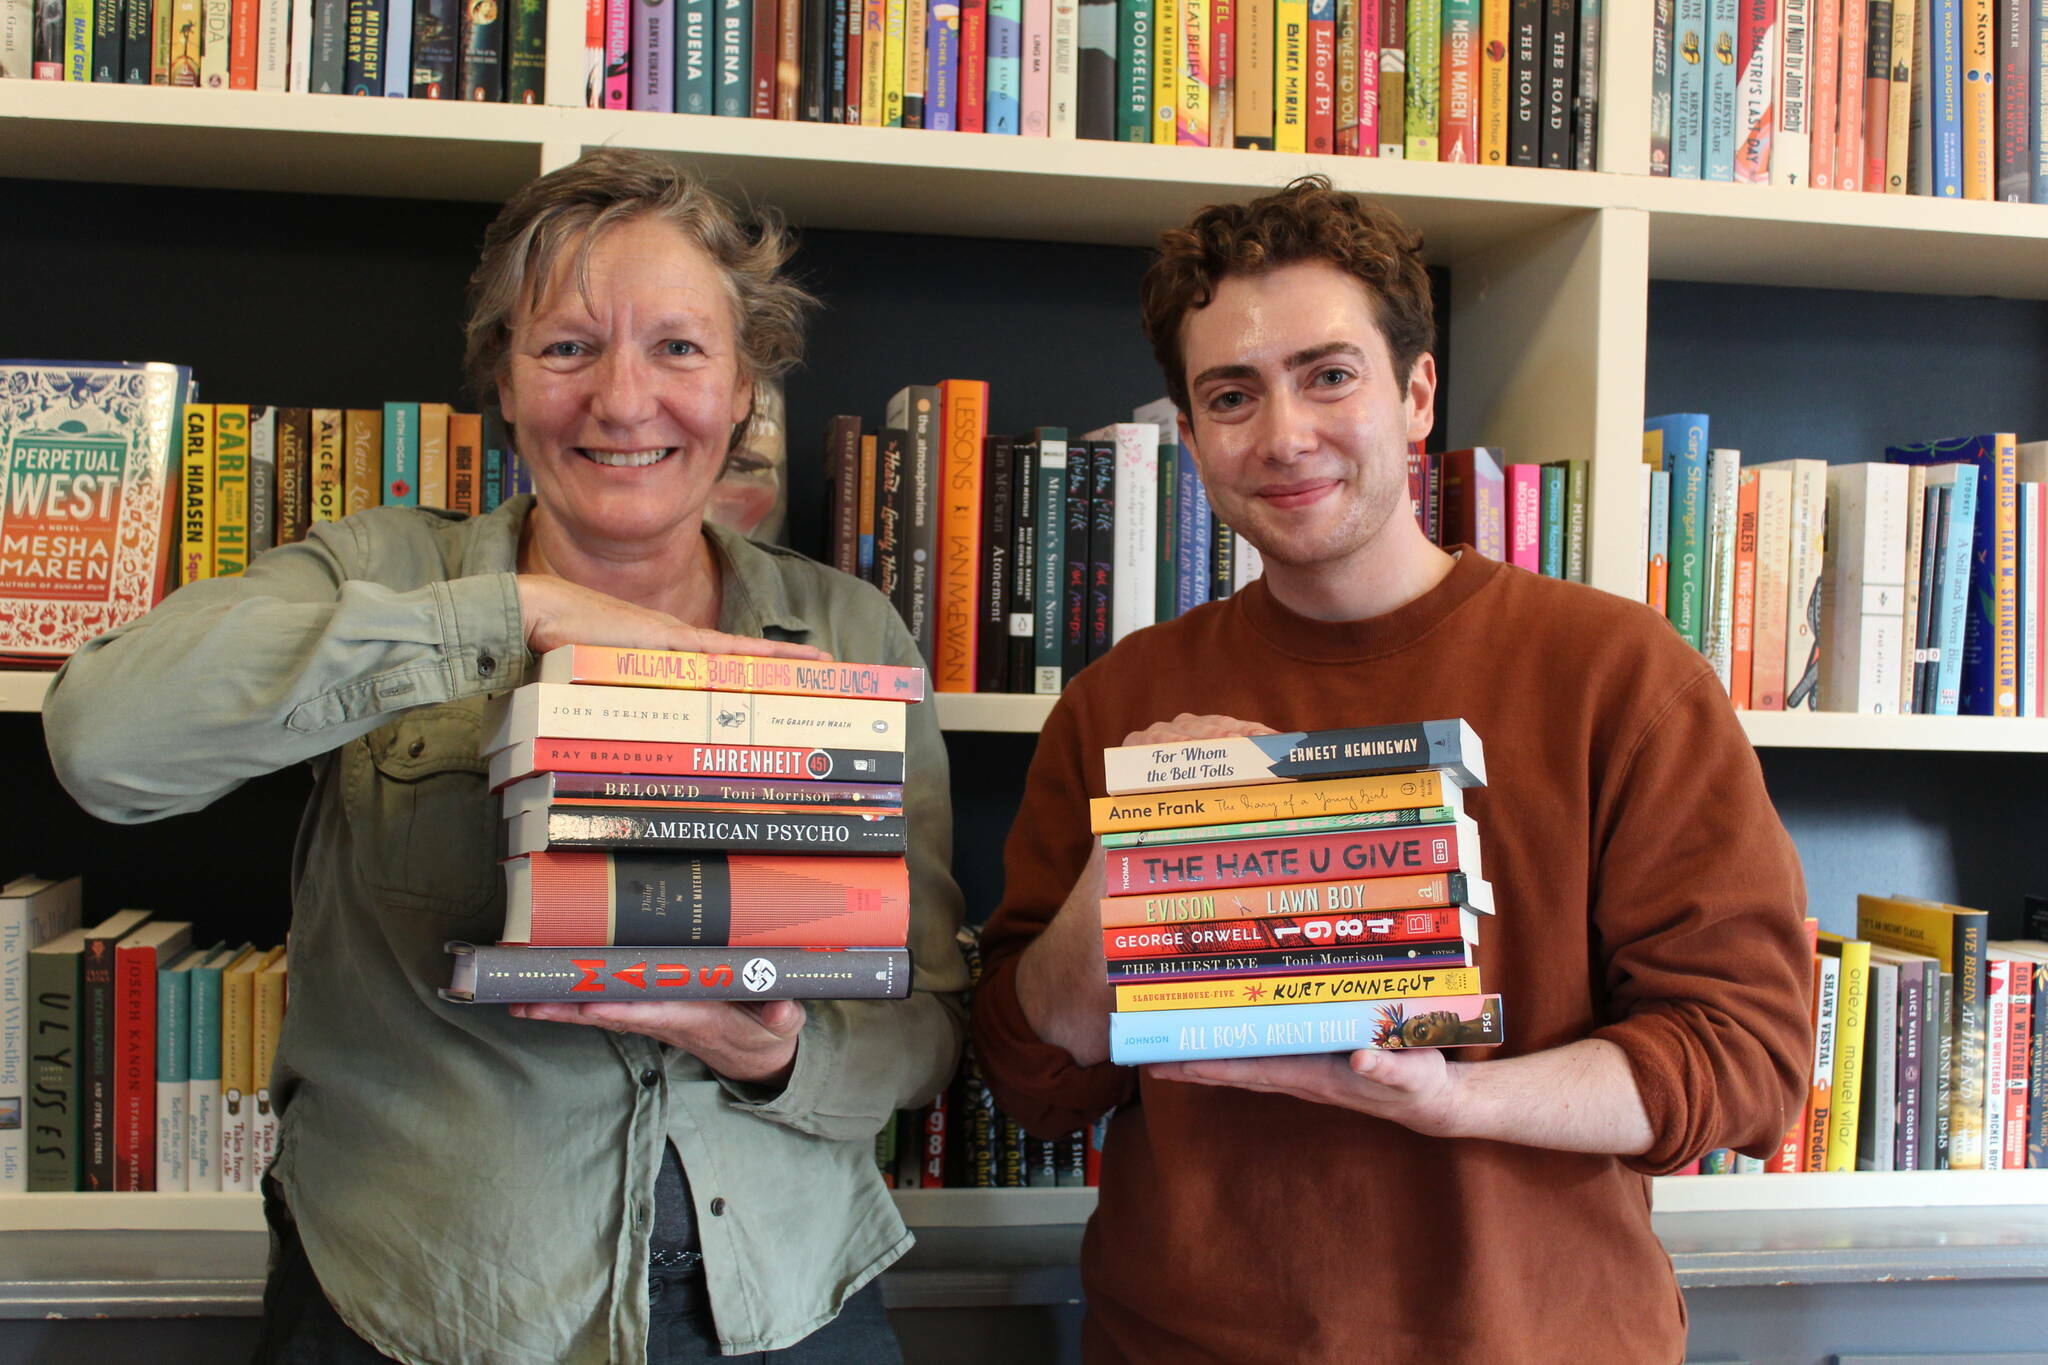 File photo by Karina Andrew/Whidbey News-Times
Meg Olson and Felix Hall show off just a few of the titles, both classic and contemporary, available at Kingfisher Bookstore in Coupeville.